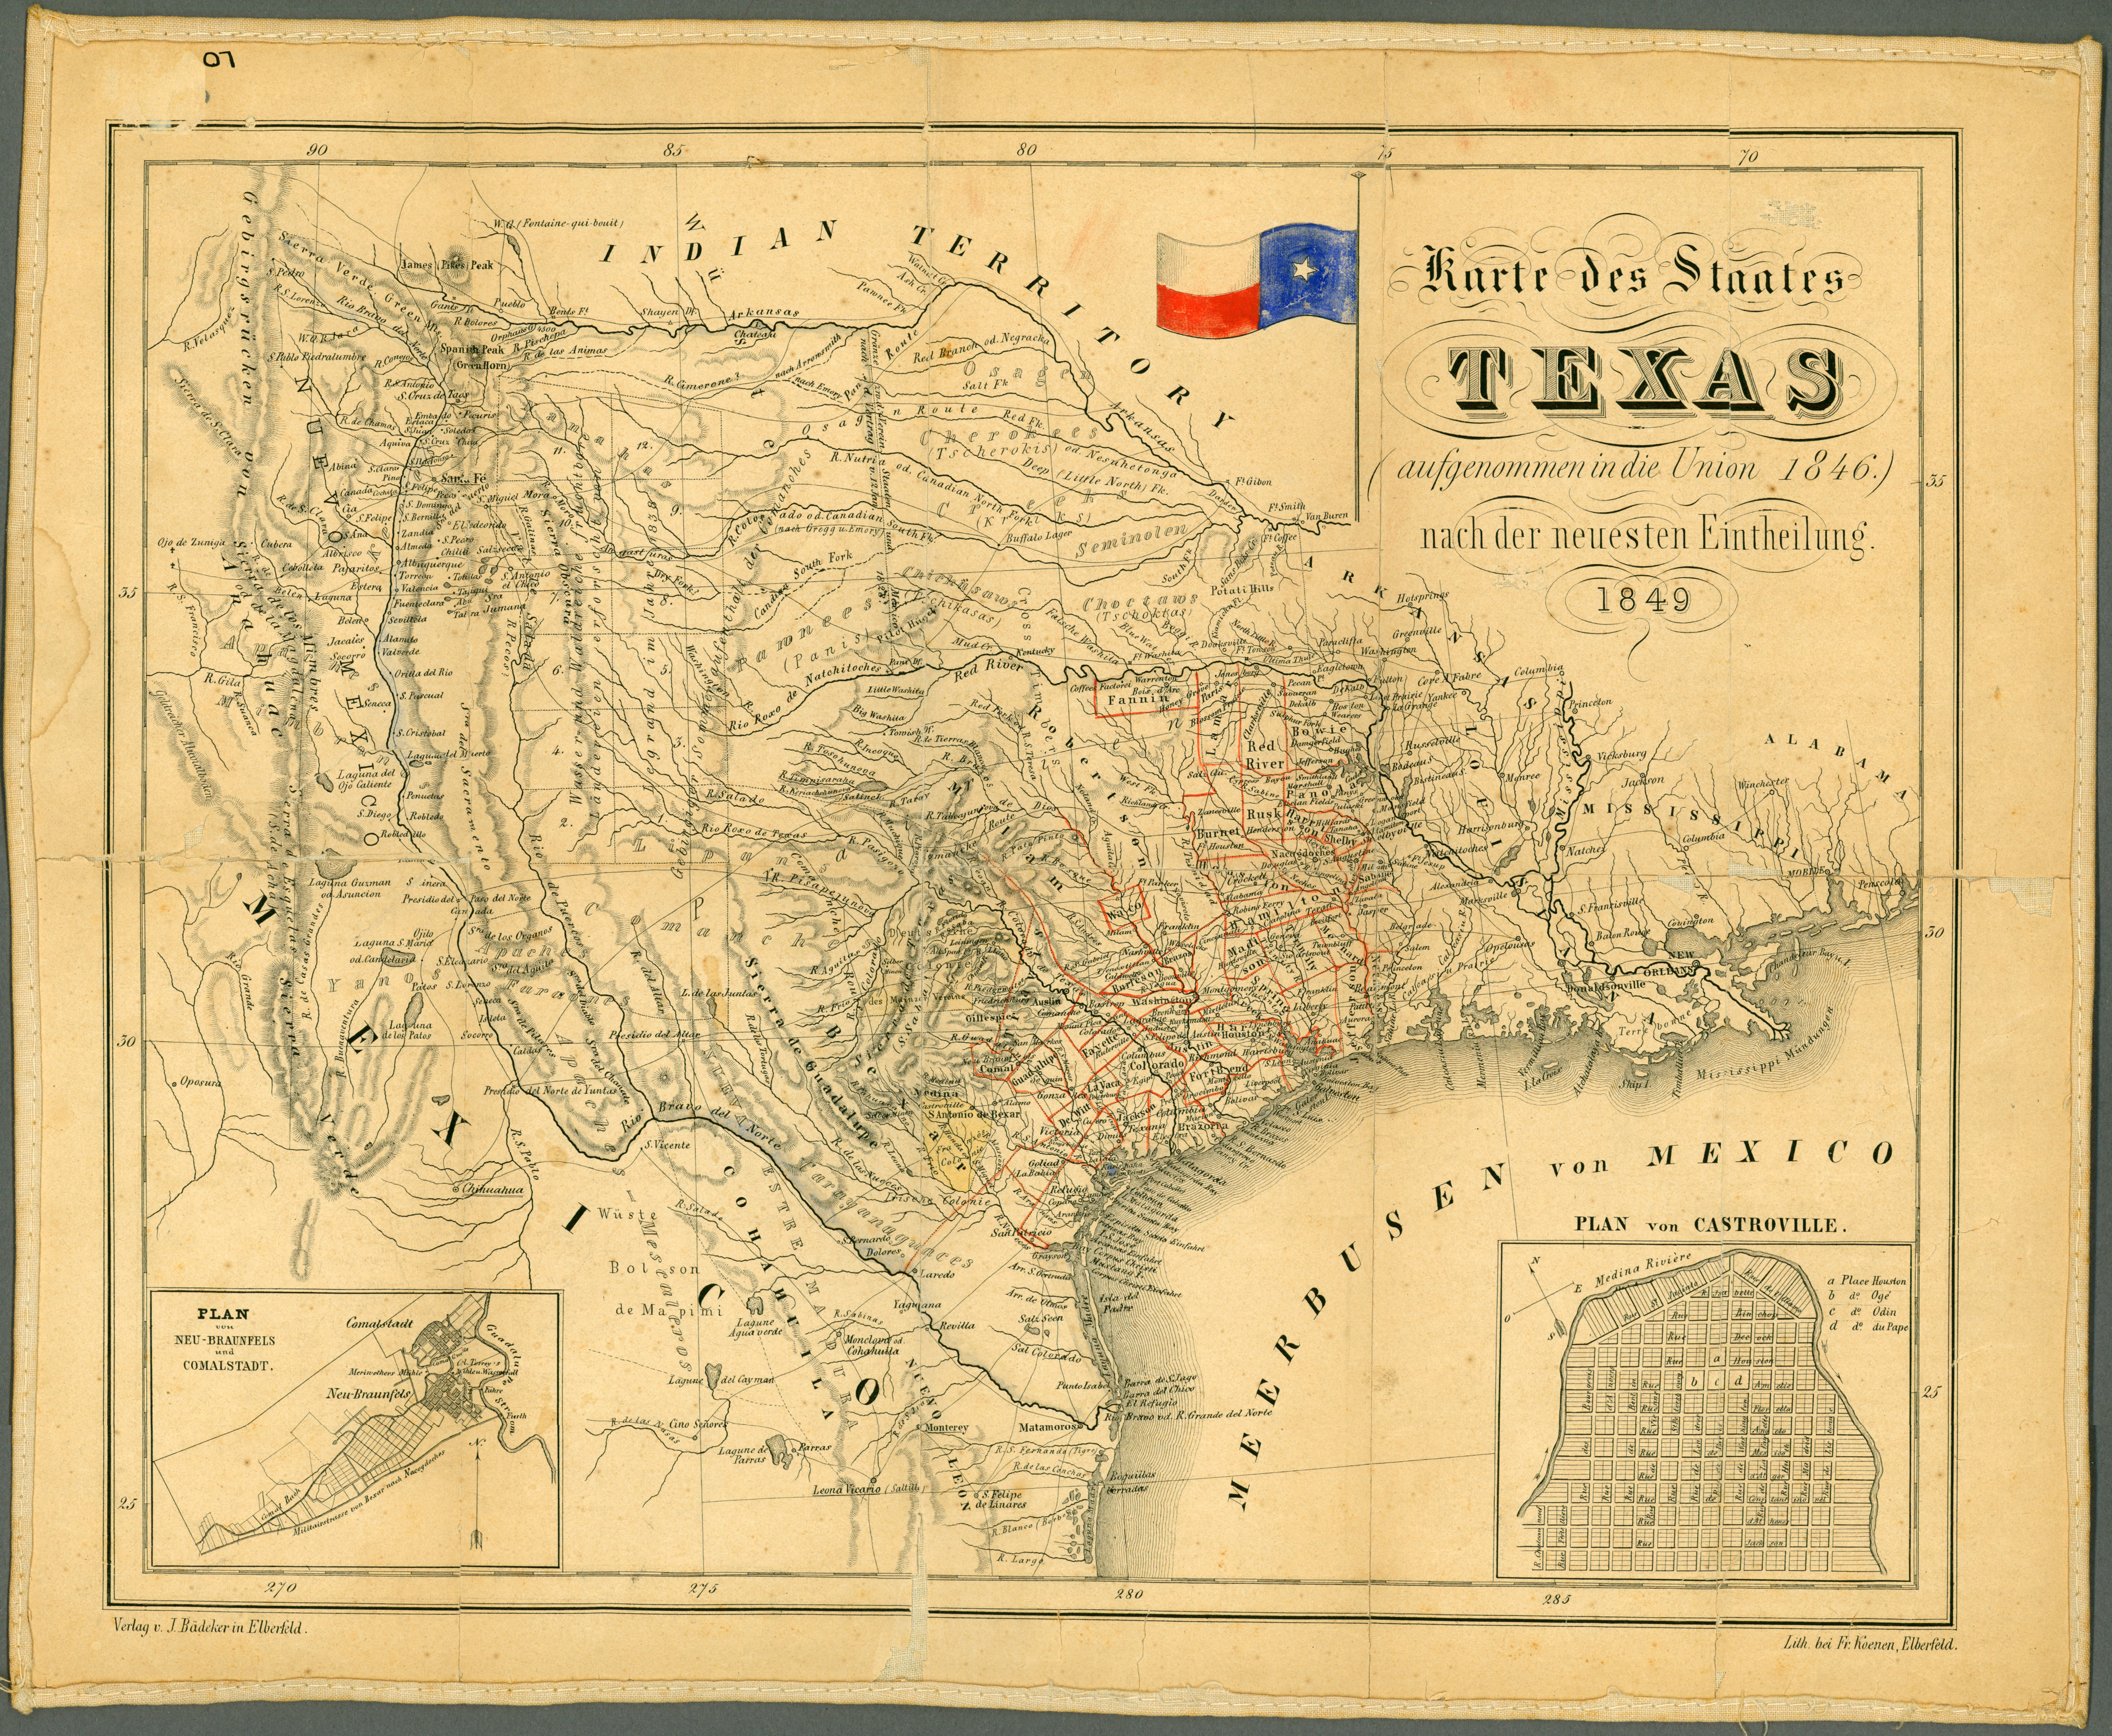 Texas Historical Maps - Perry-Castañeda Map Collection - UT Library Online4869 x 4002